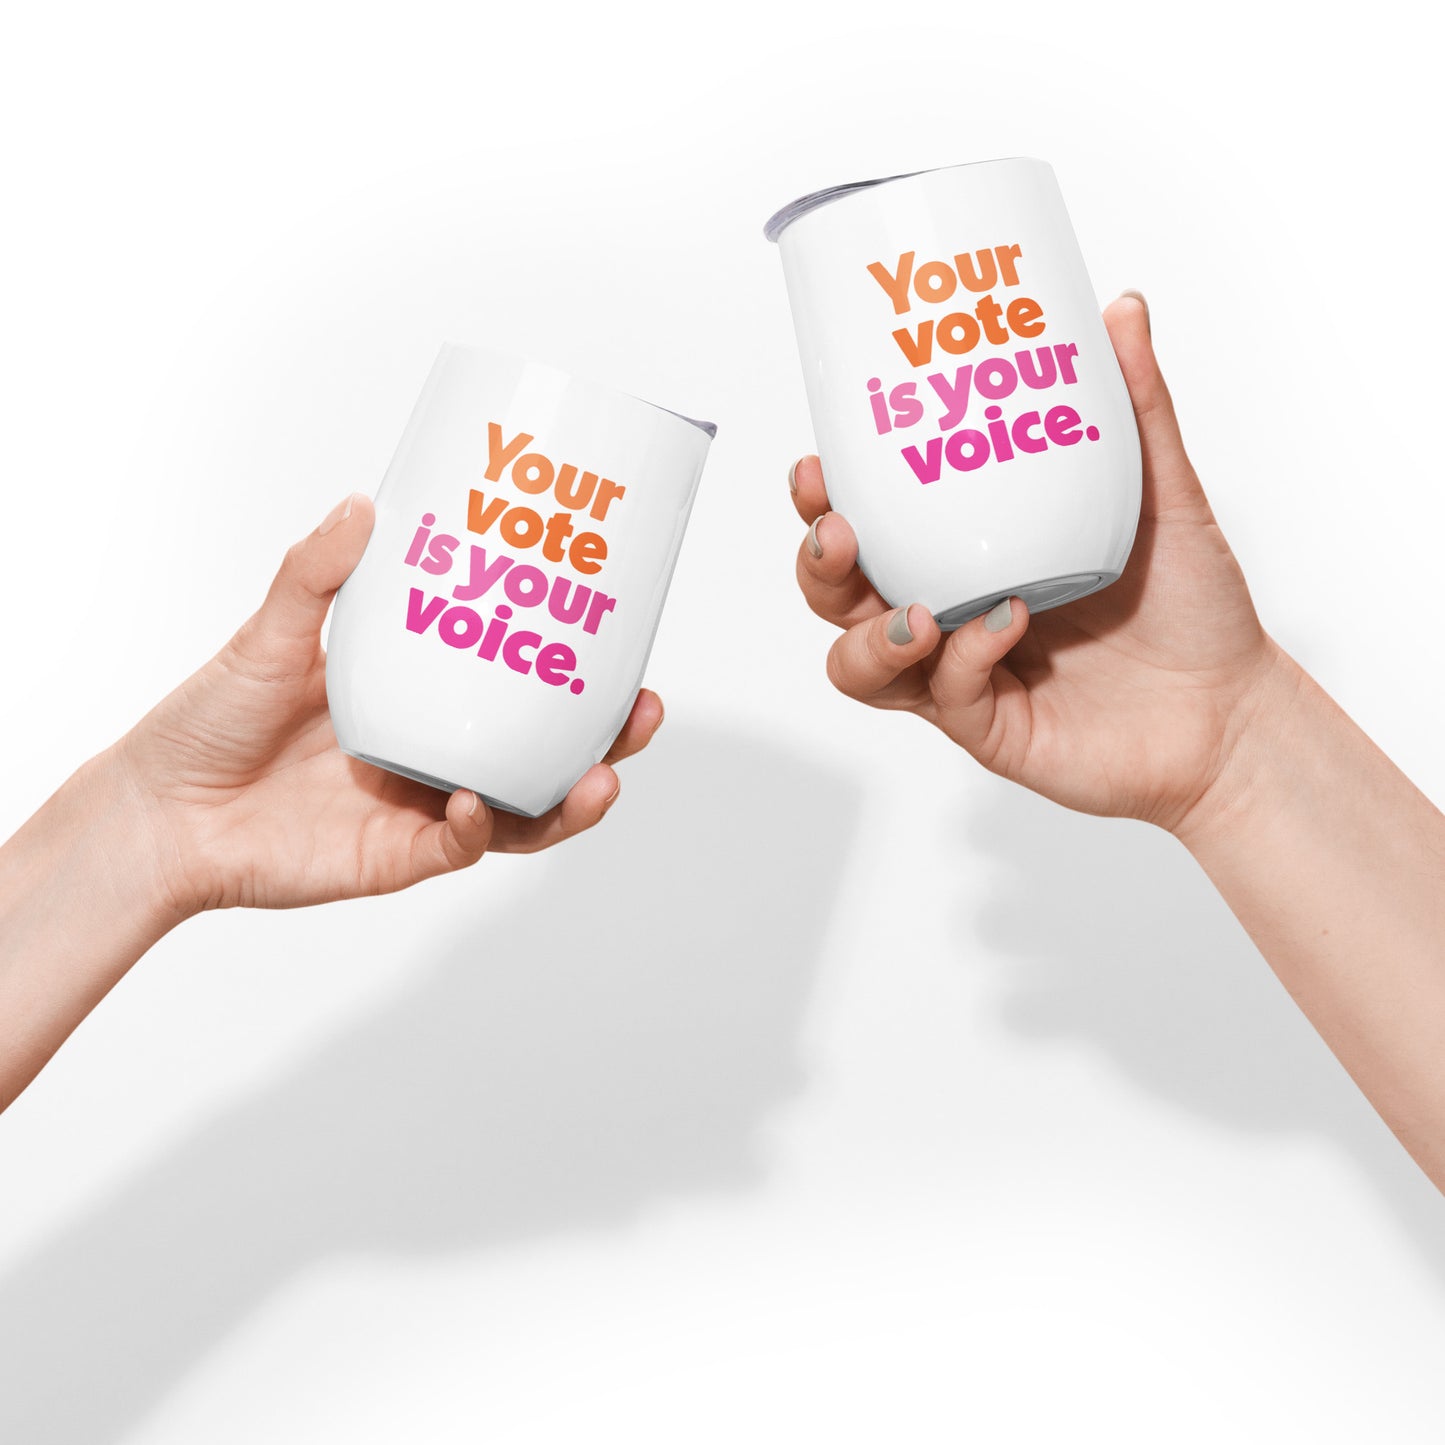 Your vote is you voice - Wine Tumbler